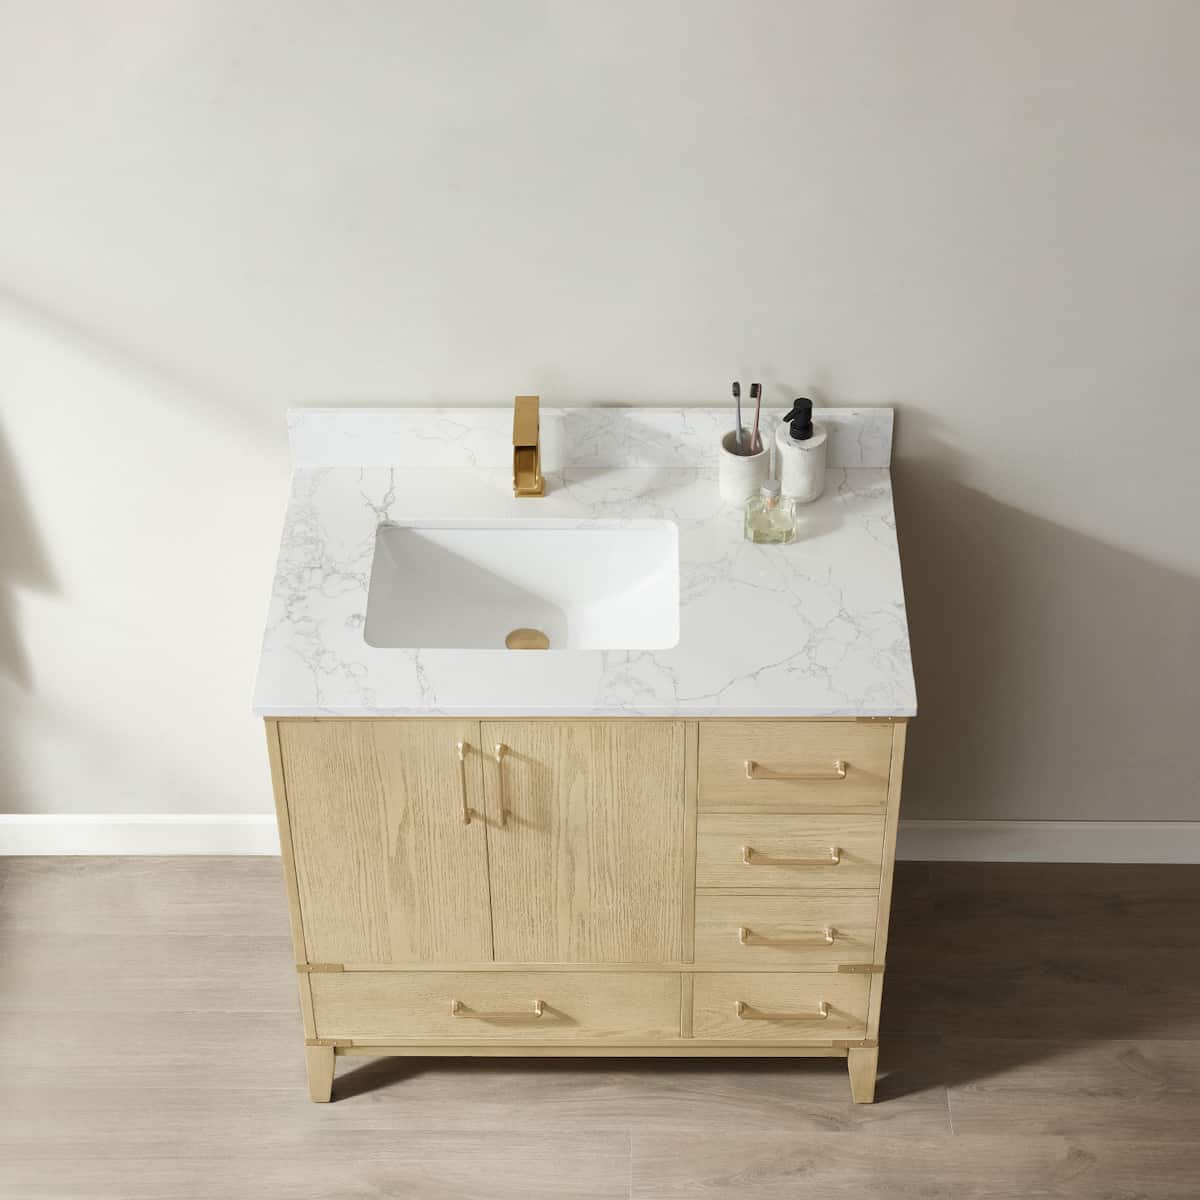 Vinosa Zaragoza 36 Inch Freestanding Single Vanity in Washed Ash with White Composite Grain Stone Countertop Without Mirror Counter 799036-WA-GW-NM